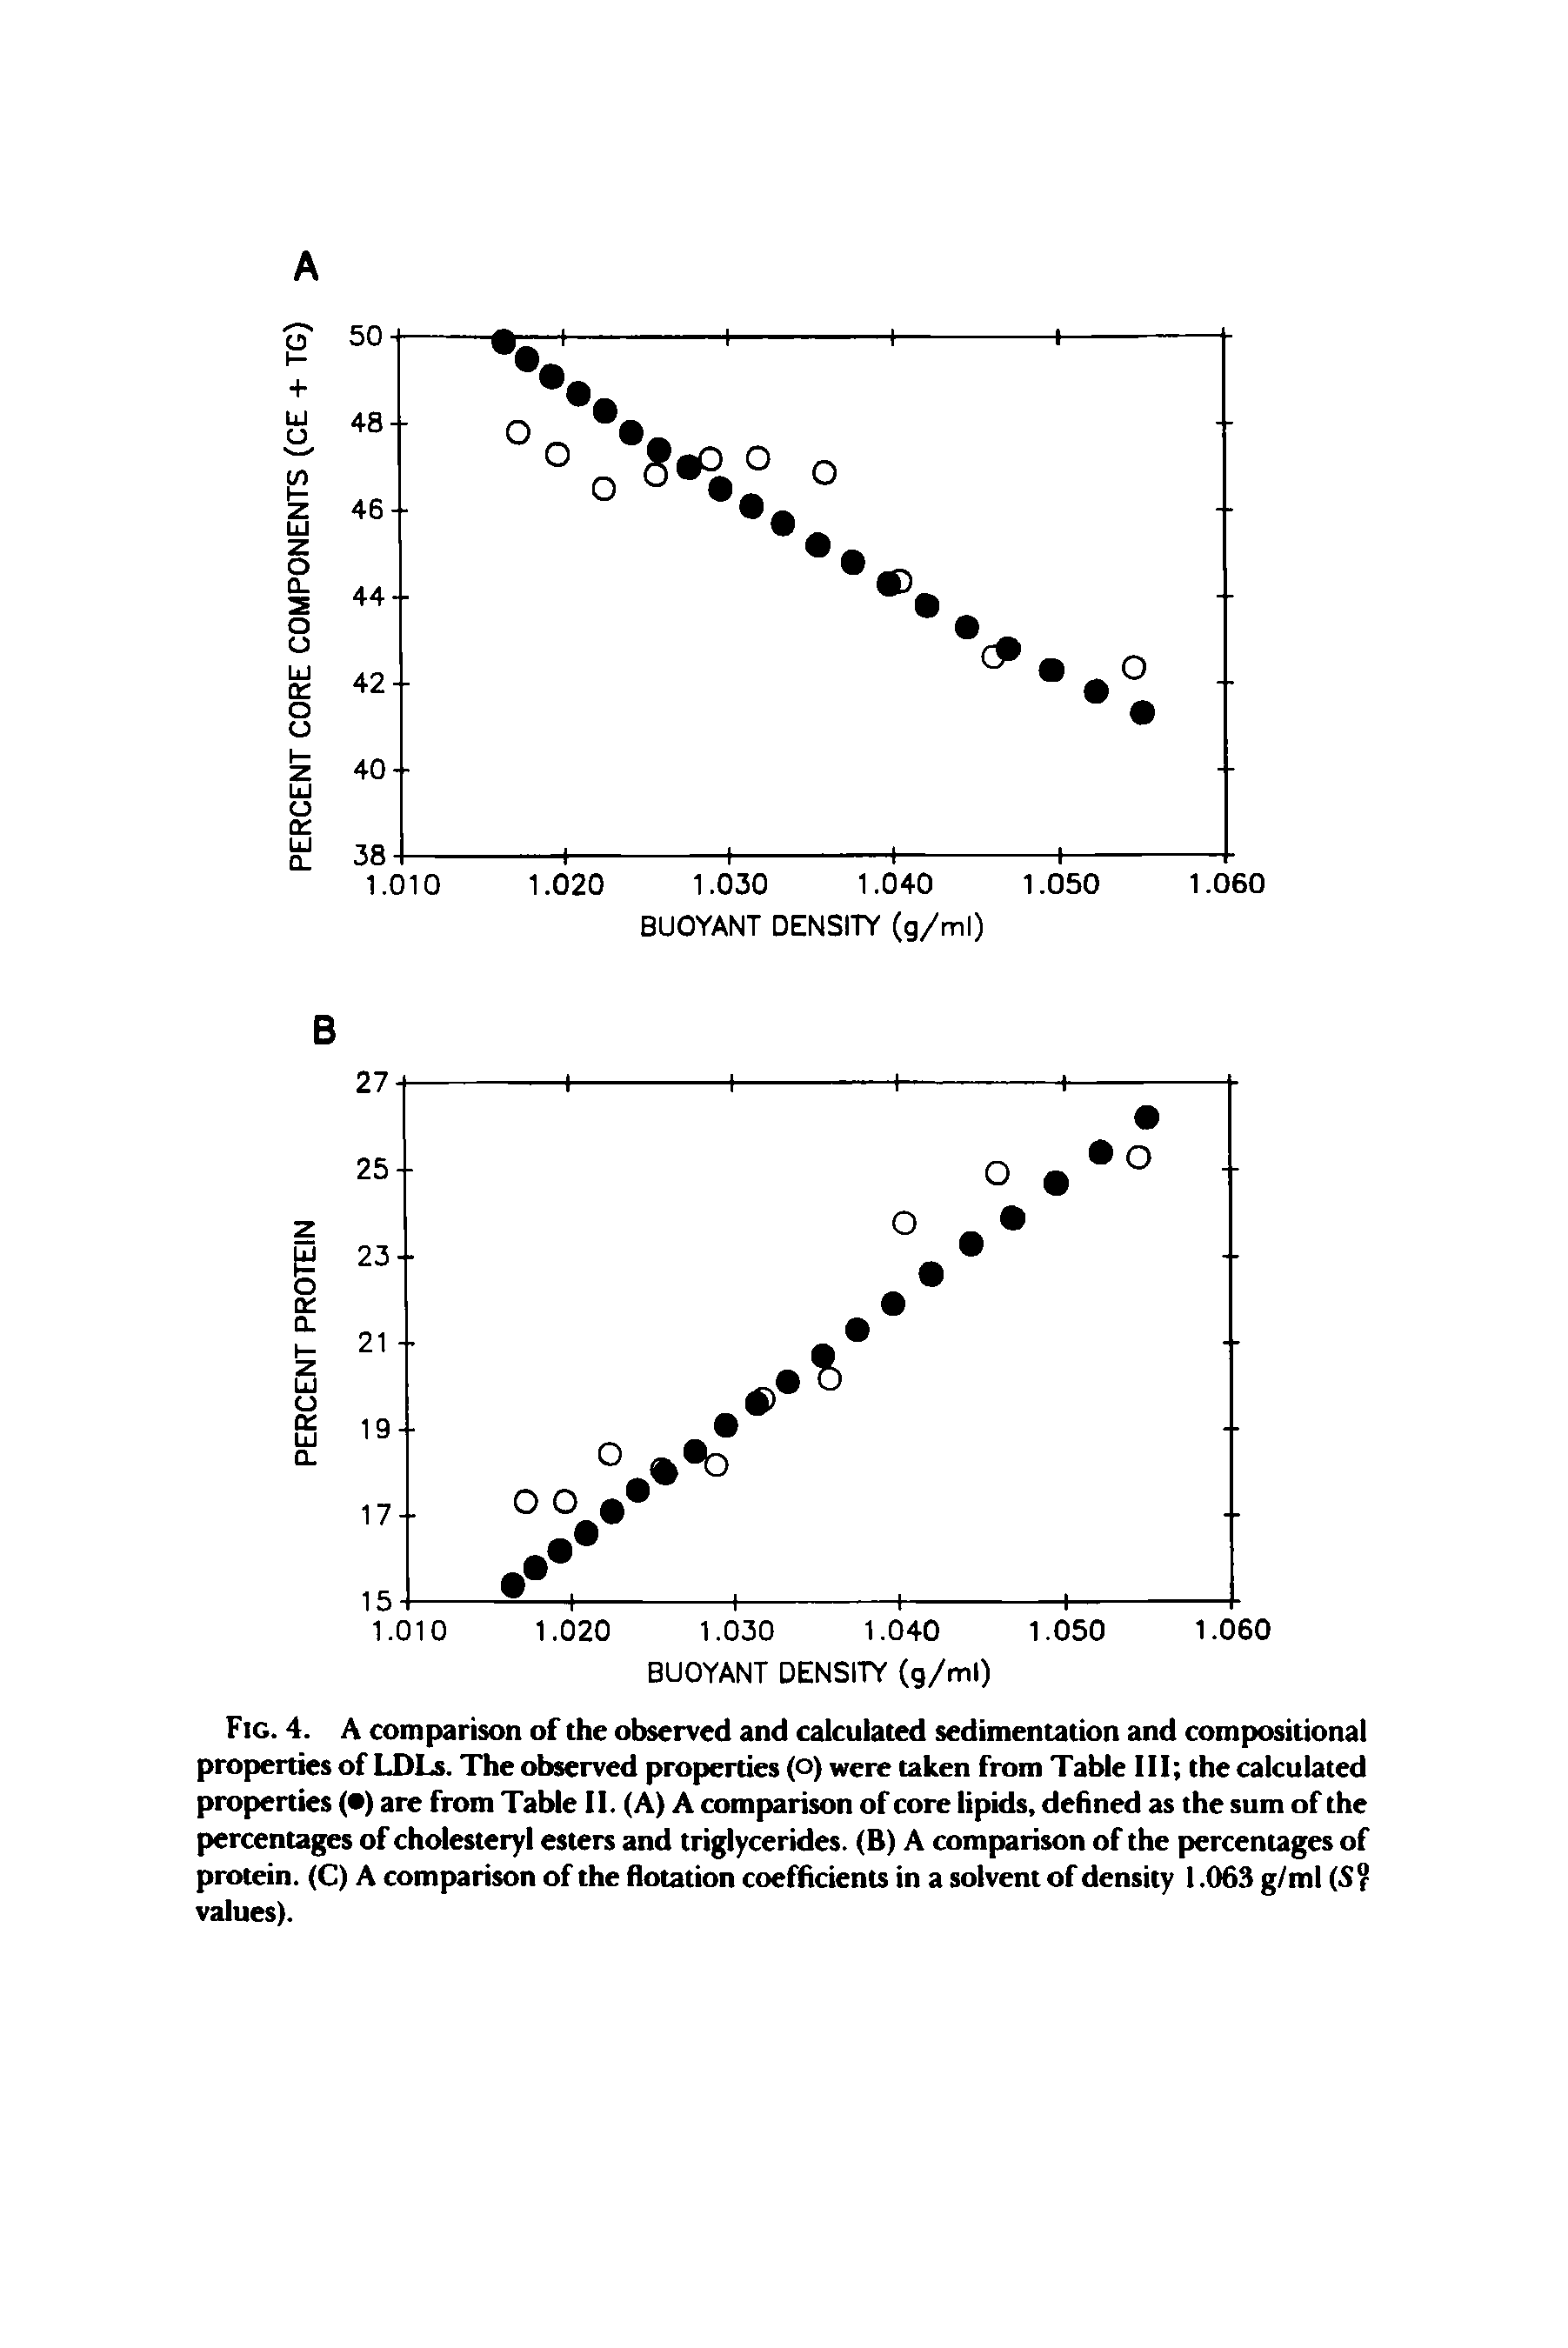 Fig. 4. A comparison of the observed and calculated sedimentation and compositional properties of LDLs. The observed properties (o) were taken from Table III the calculated properties ( ) are from Table II. (A) A comparison of core lipids, defined as the sum of the percentages of cholesteryl esters and triglycerides. (B) A comparison of the percentages of protein. (C) A comparison of the flotation coefficients in a solvent of density 1.063 g/ml (S° values).